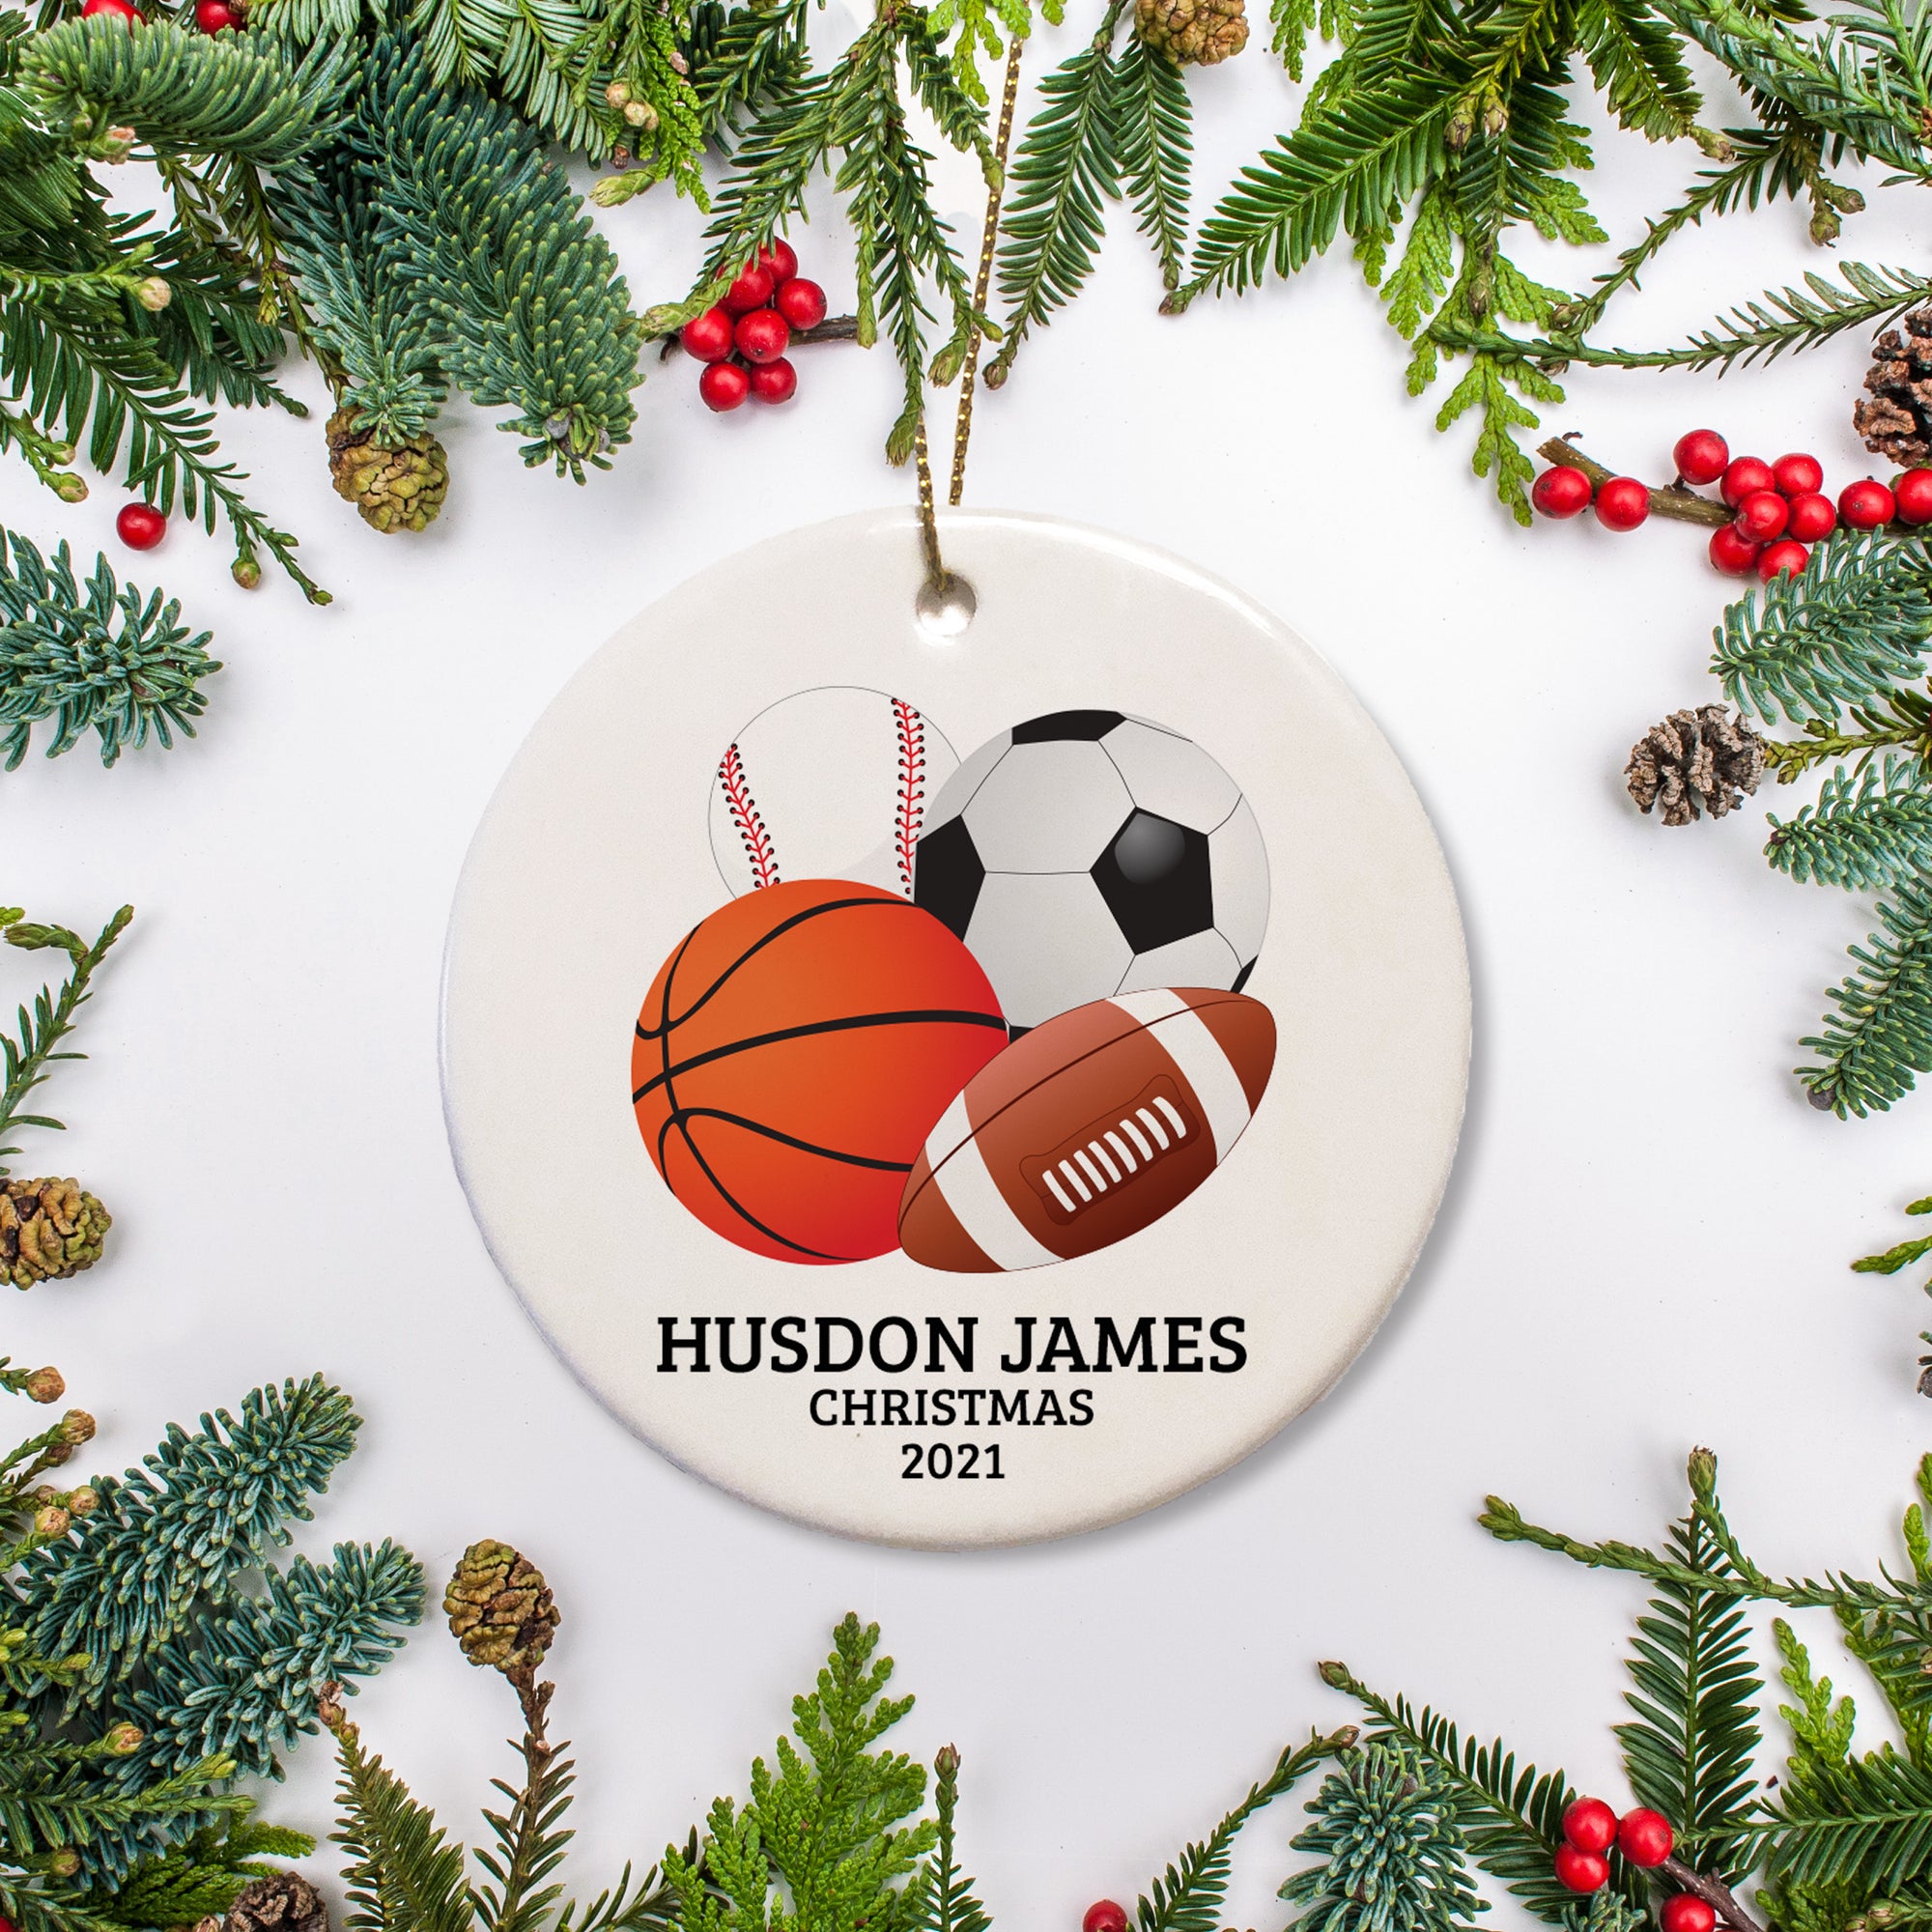 Personalized Christmas ornament featuring sports!  Basketball, baseball, football and soccer | Pipsy.com